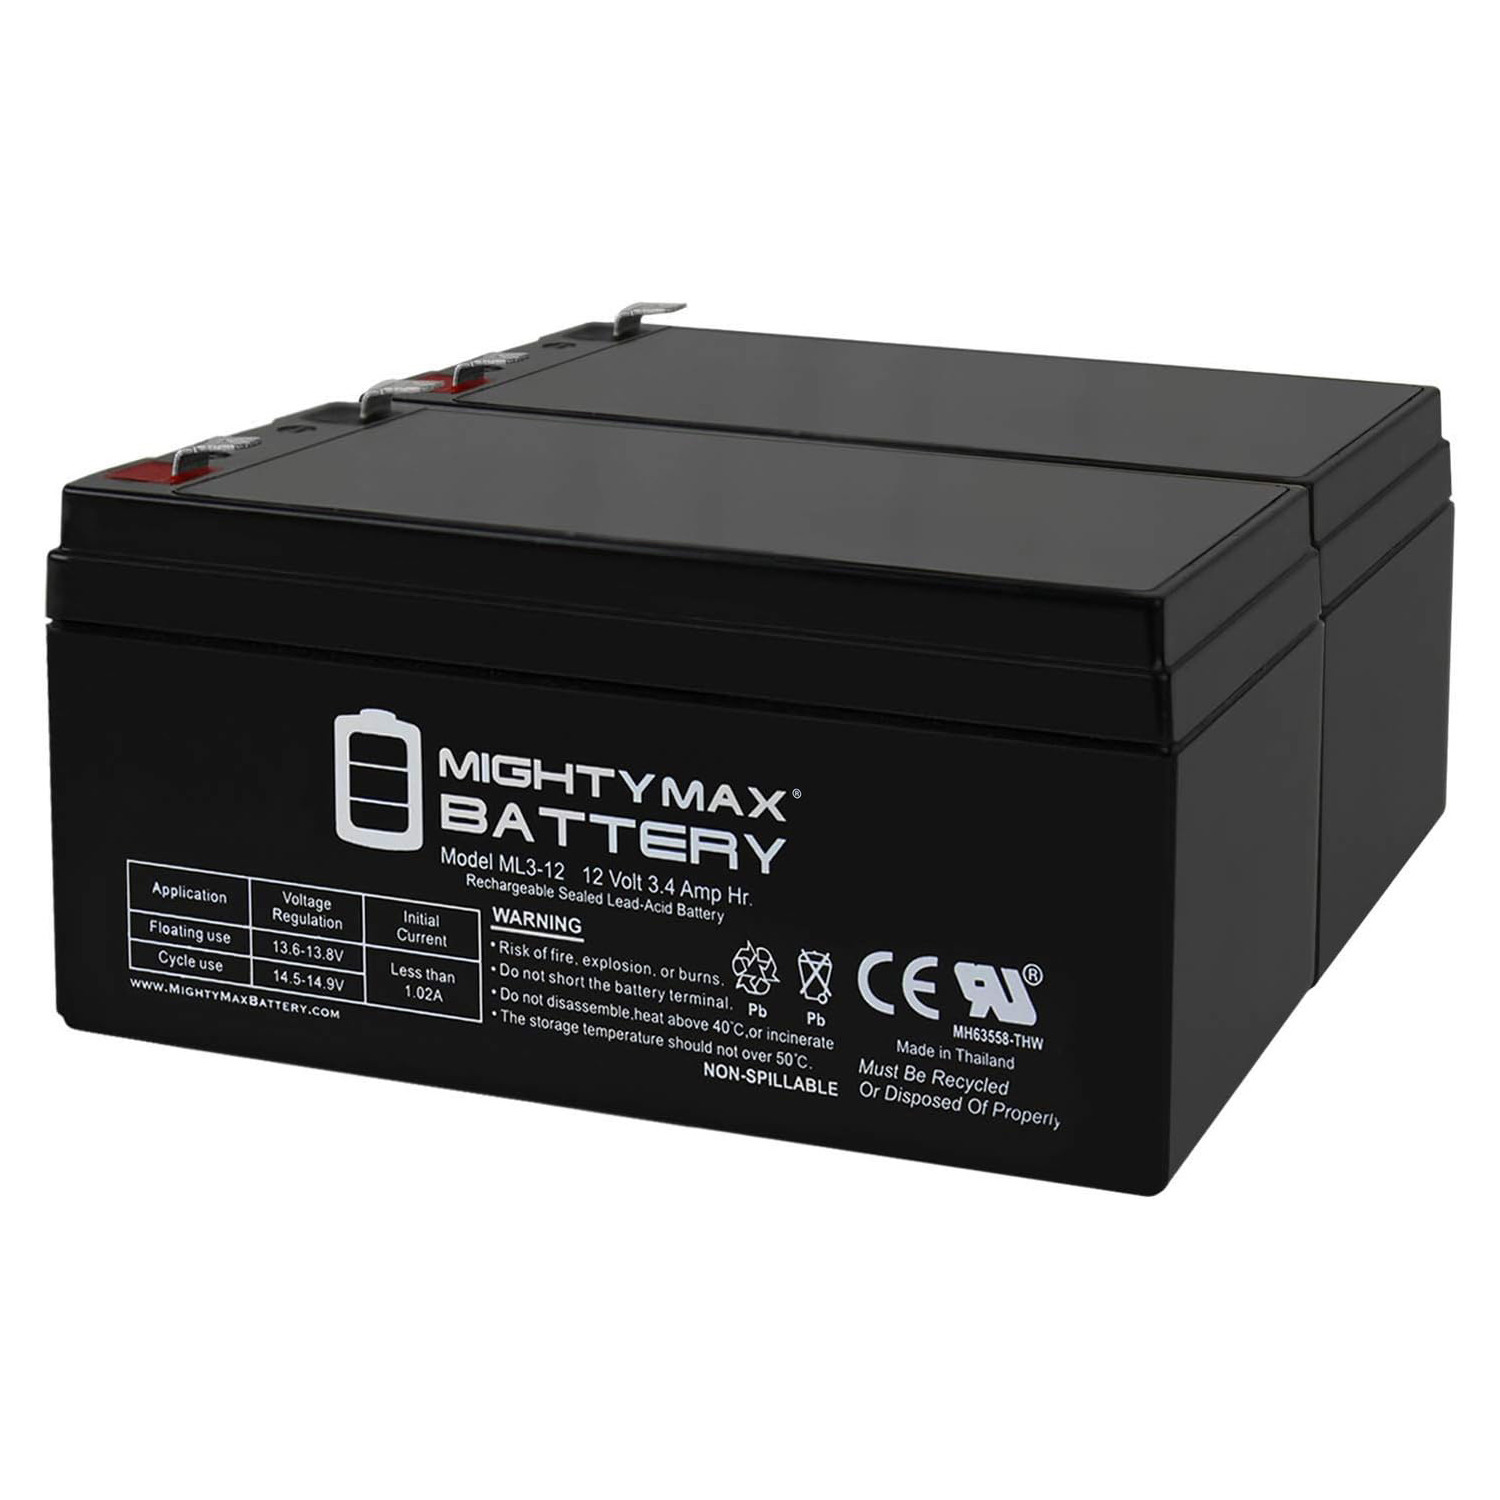 ML3-12 - 12V 3AH Replacement Battery for Yuasa NP3.4-12, NP 3.4-12 Btty - 2 Pack